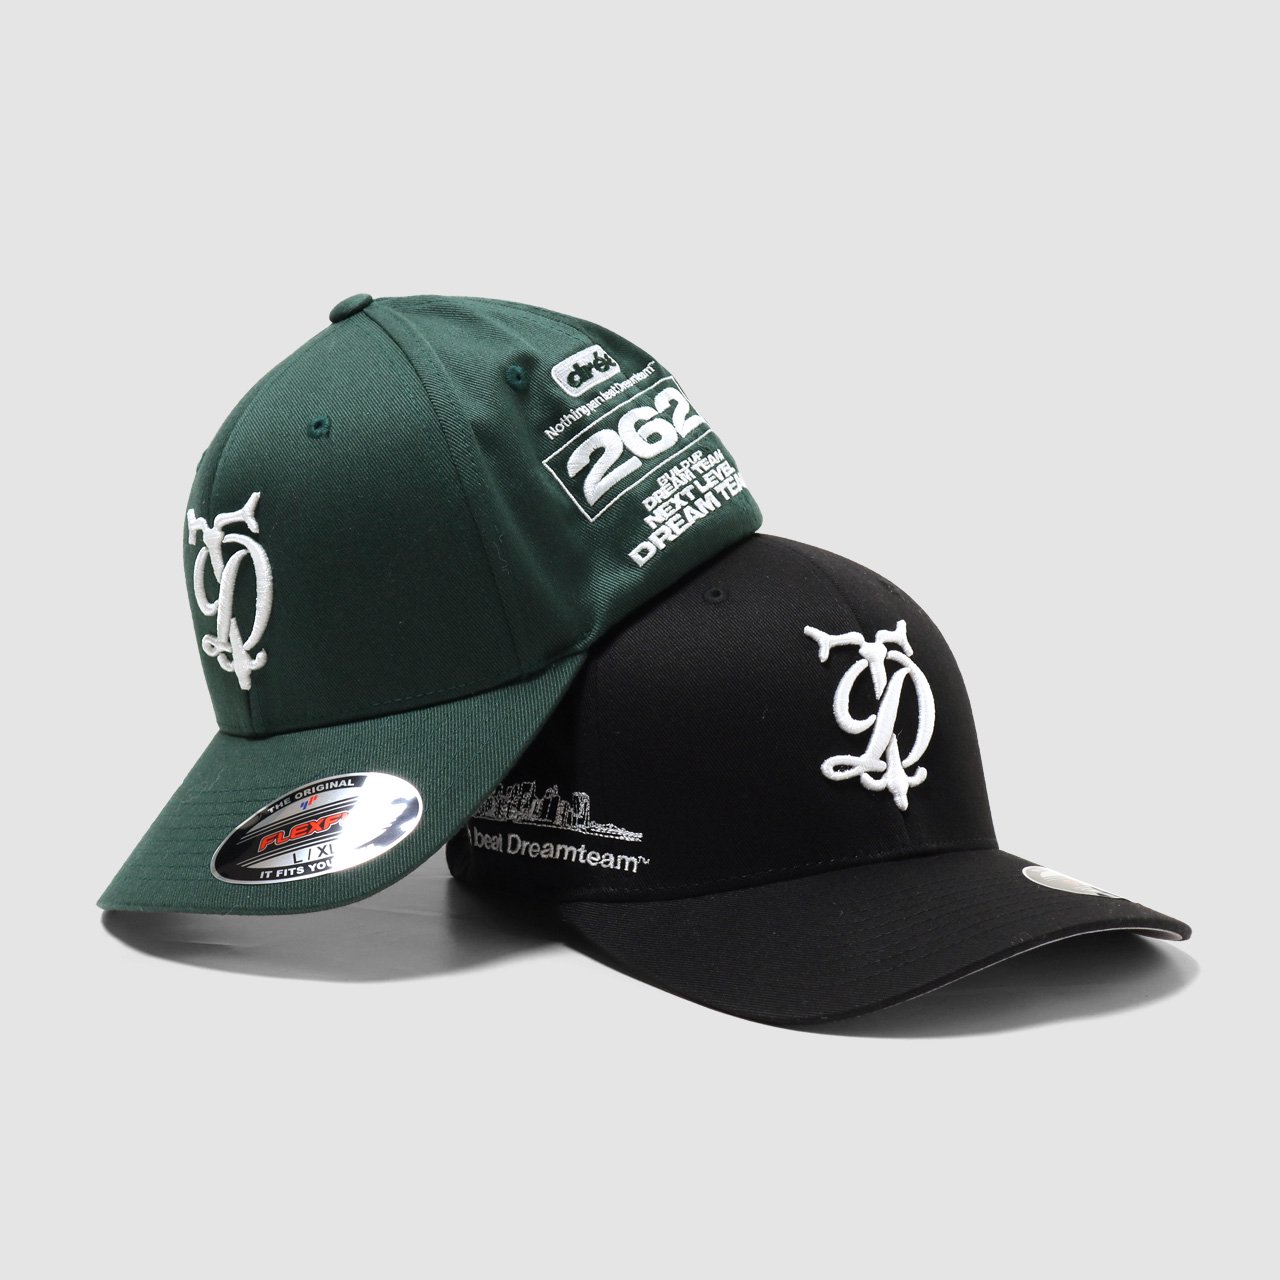 <img class='new_mark_img1' src='https://img.shop-pro.jp/img/new/icons35.gif' style='border:none;display:inline;margin:0px;padding:0px;width:auto;' />DT Vintage Logo Flexfit Cap